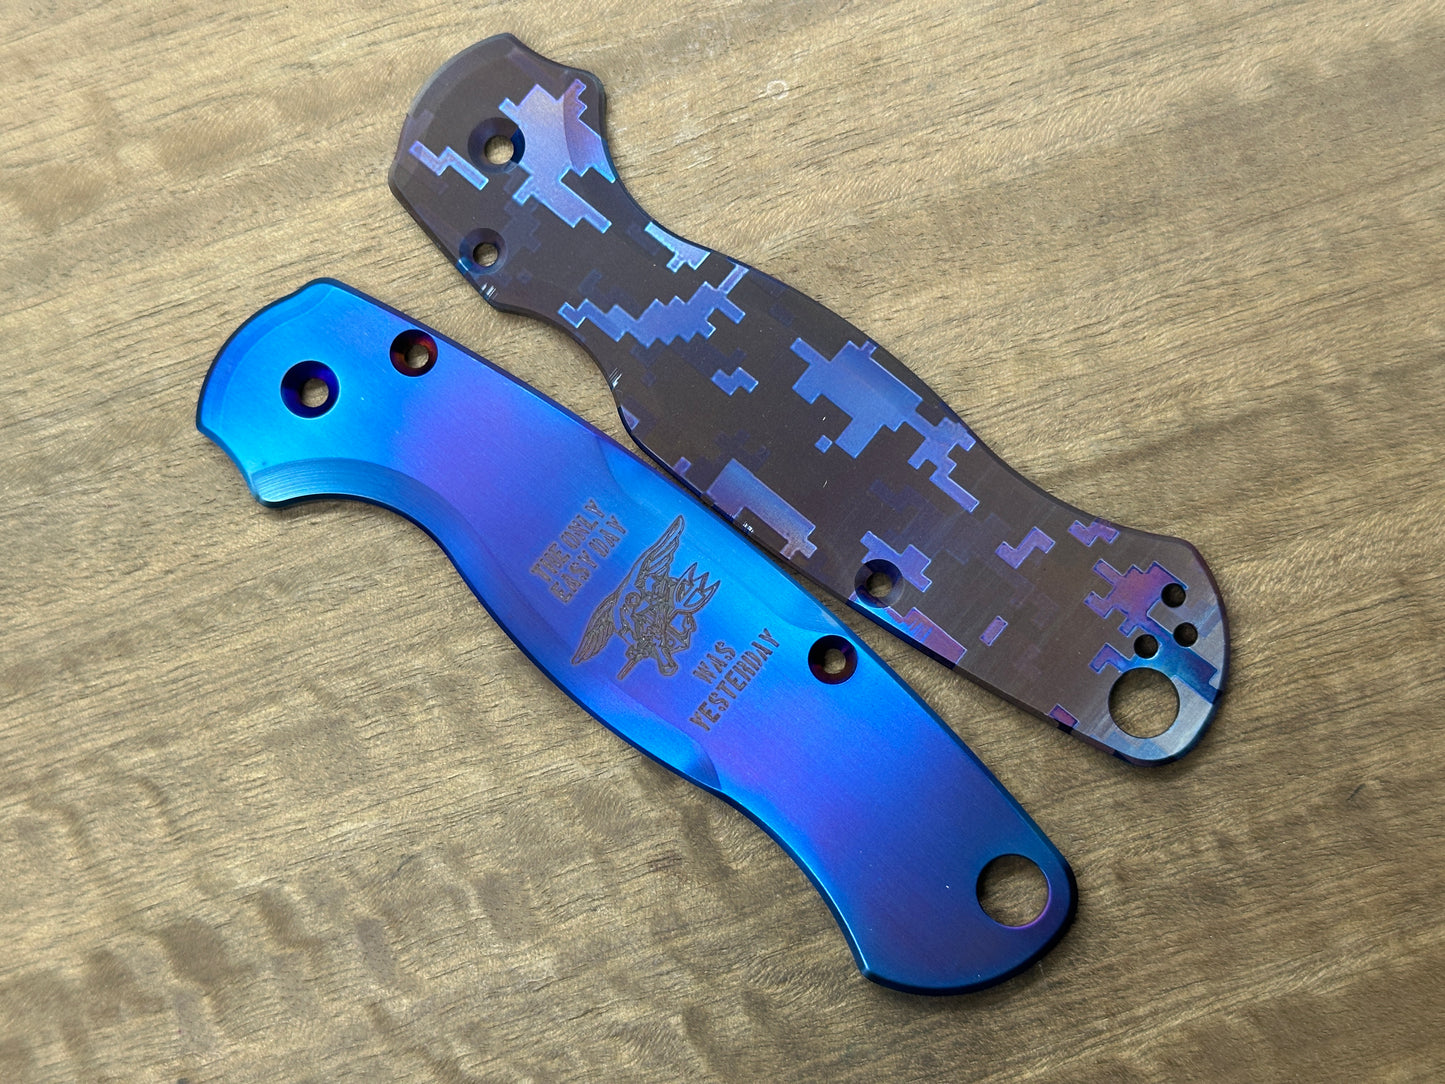 US NAVY Seals The only easy day was yesterday Titanium scales for Spyderco Paramilitary 2 PM2